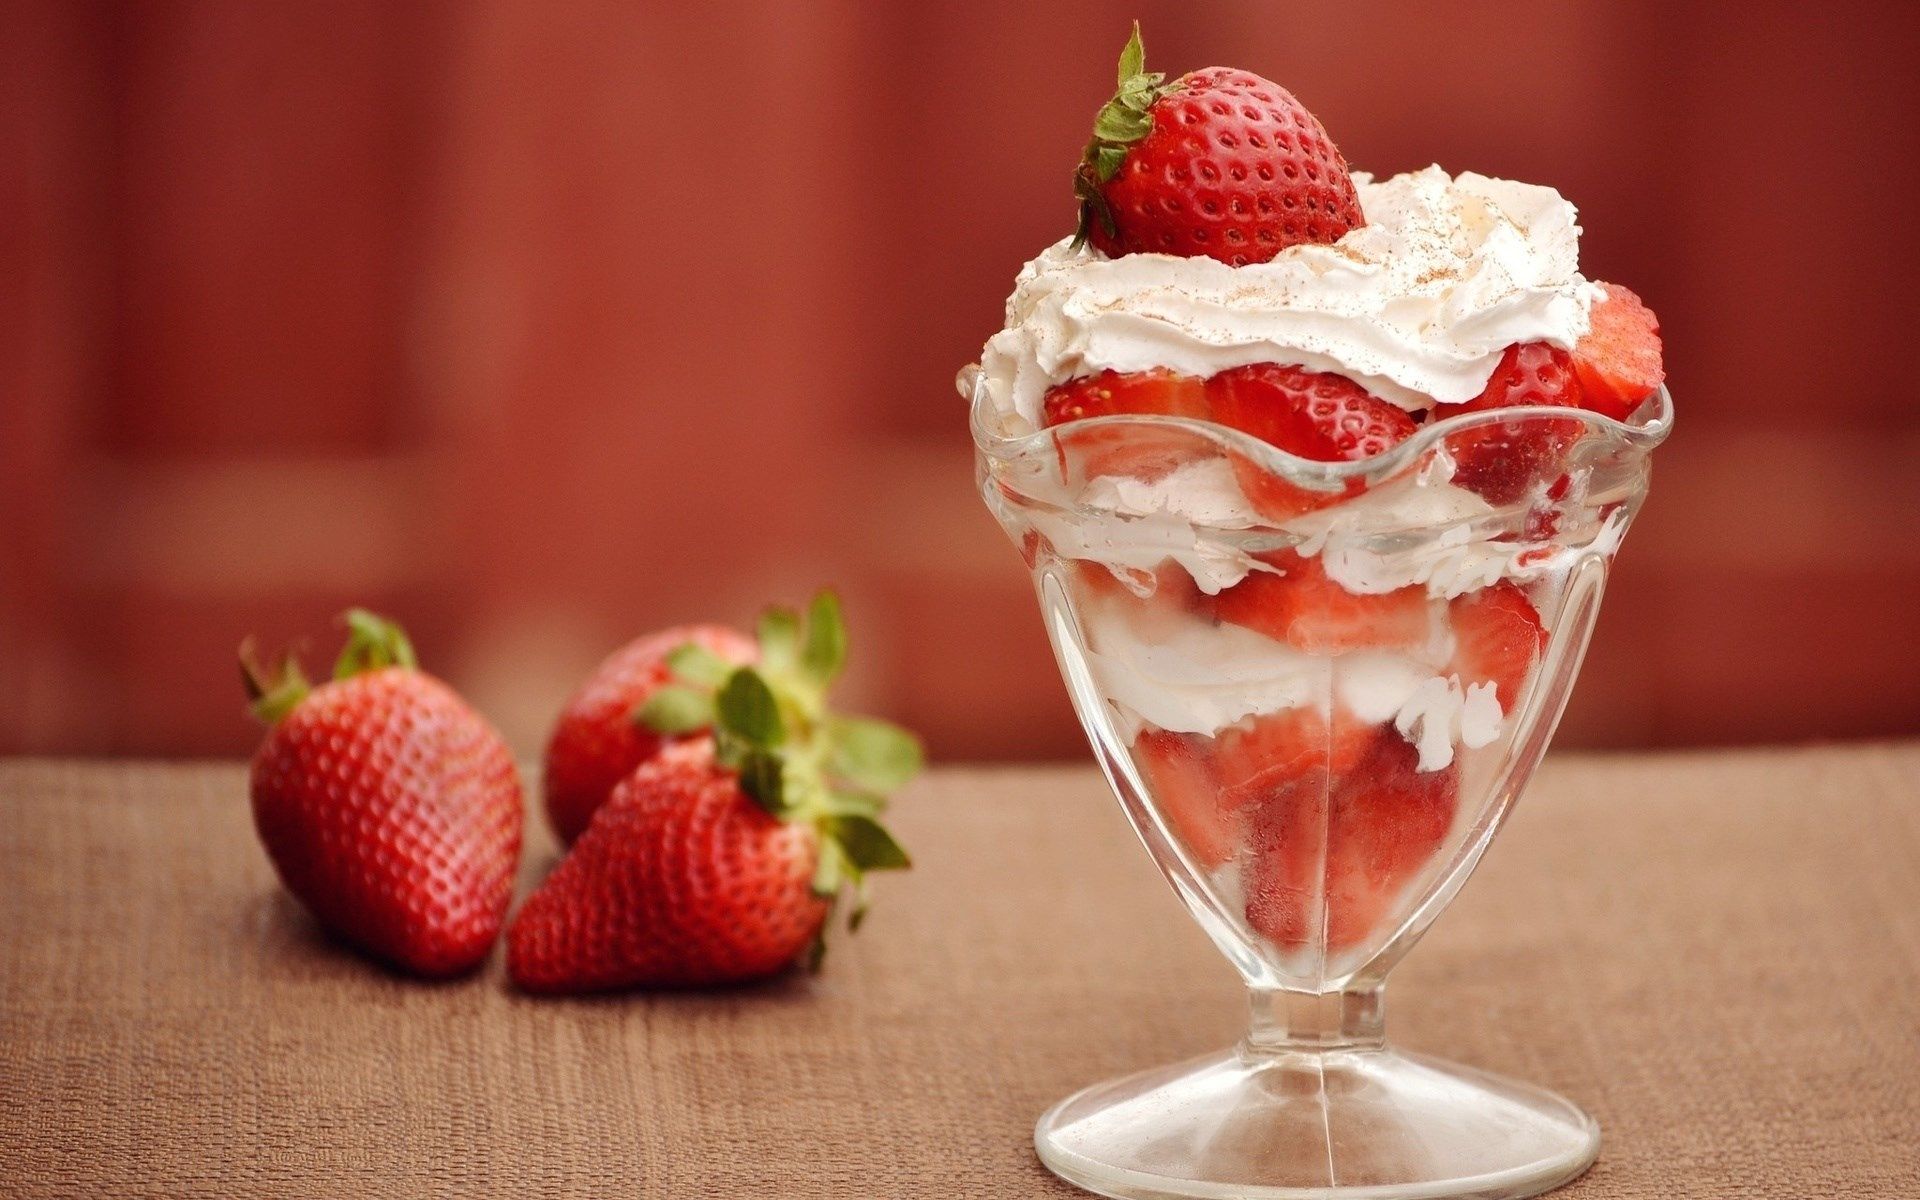 strawberry whipping cream - Google Search | Food to EAT! | Pinterest ...